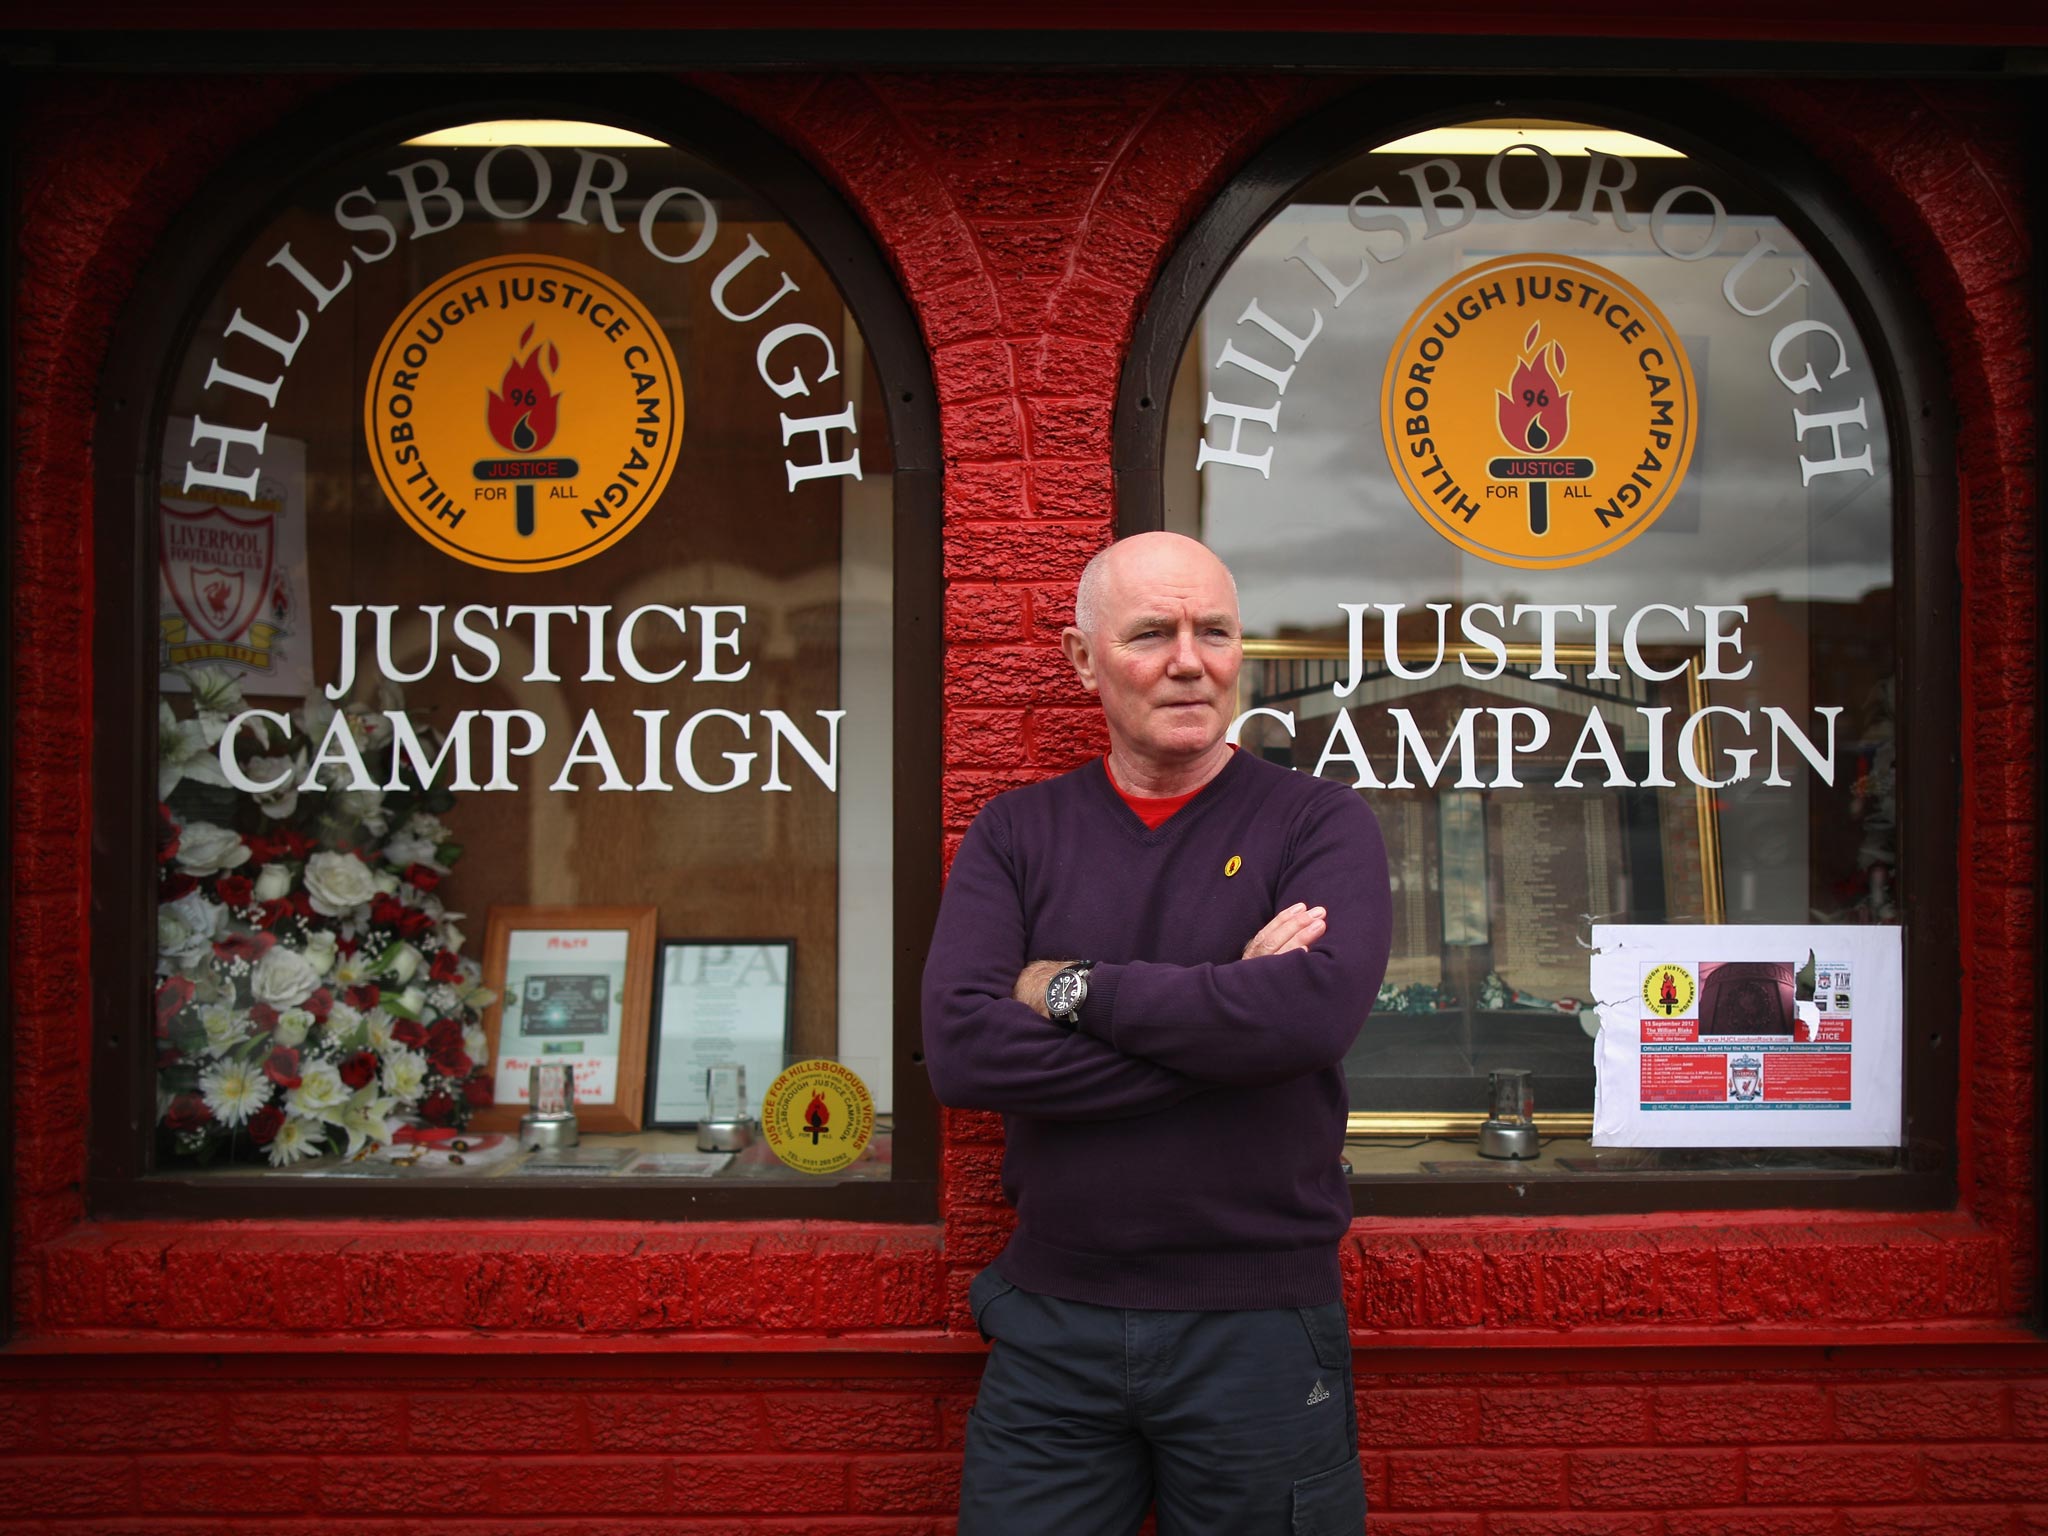 Steve Kelly, who lost his brother, Michael, in the tragedy, outside the Hillsborough Justice Campaign headquarters near Anfield Stadium, home of Liverpool FC